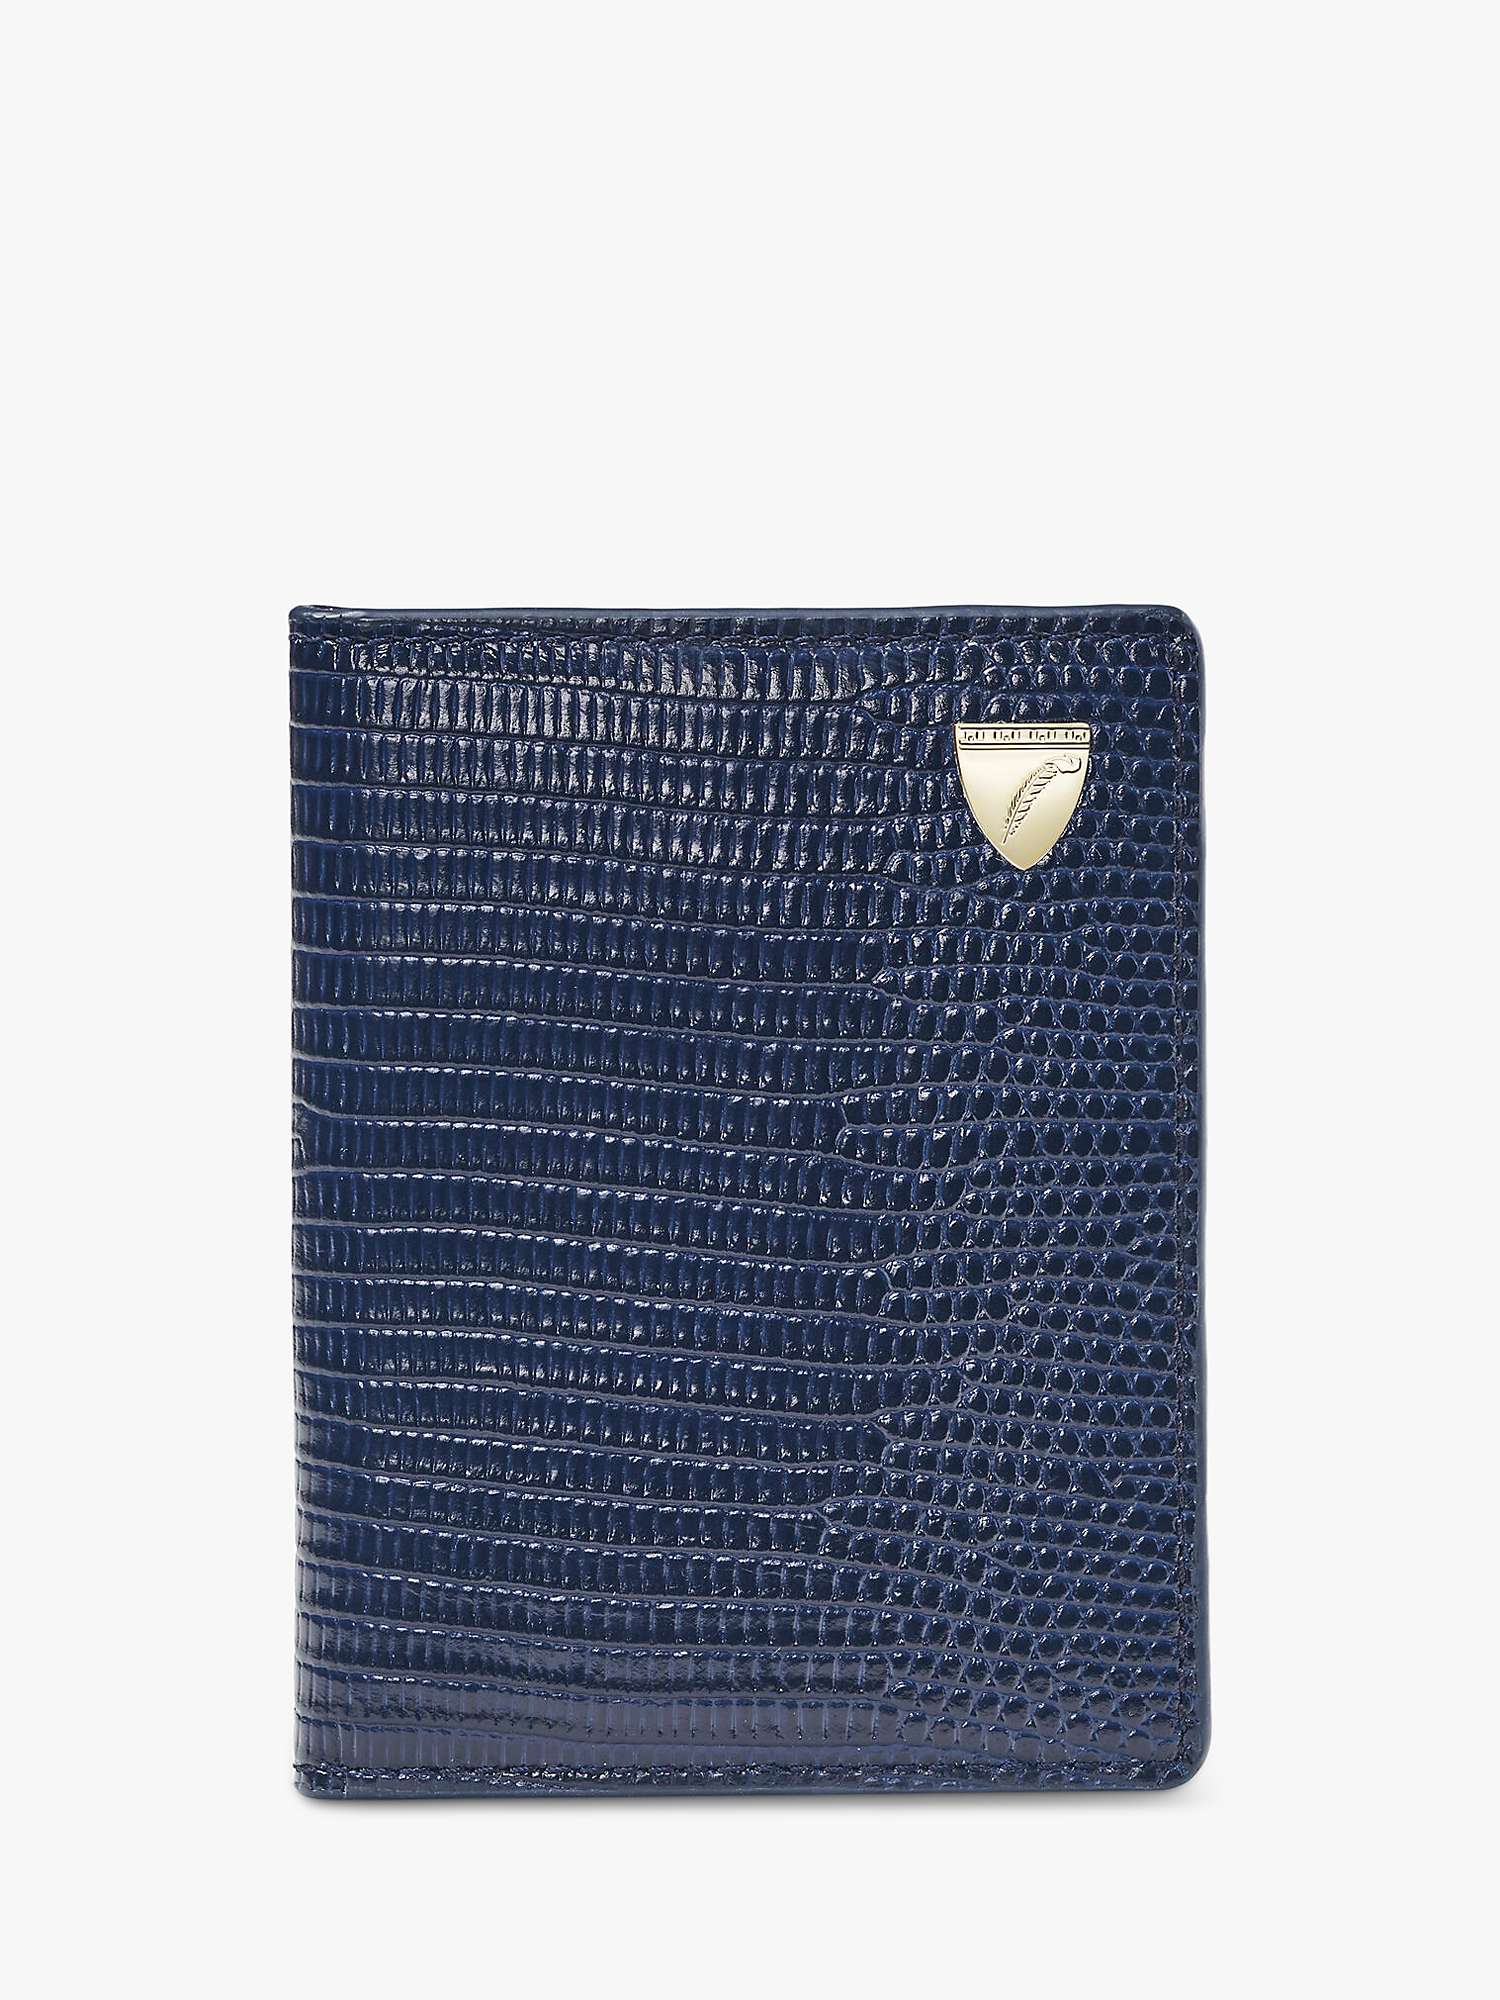 Buy Aspinal of London Lizard Leather ID & Travel Card Case Online at johnlewis.com